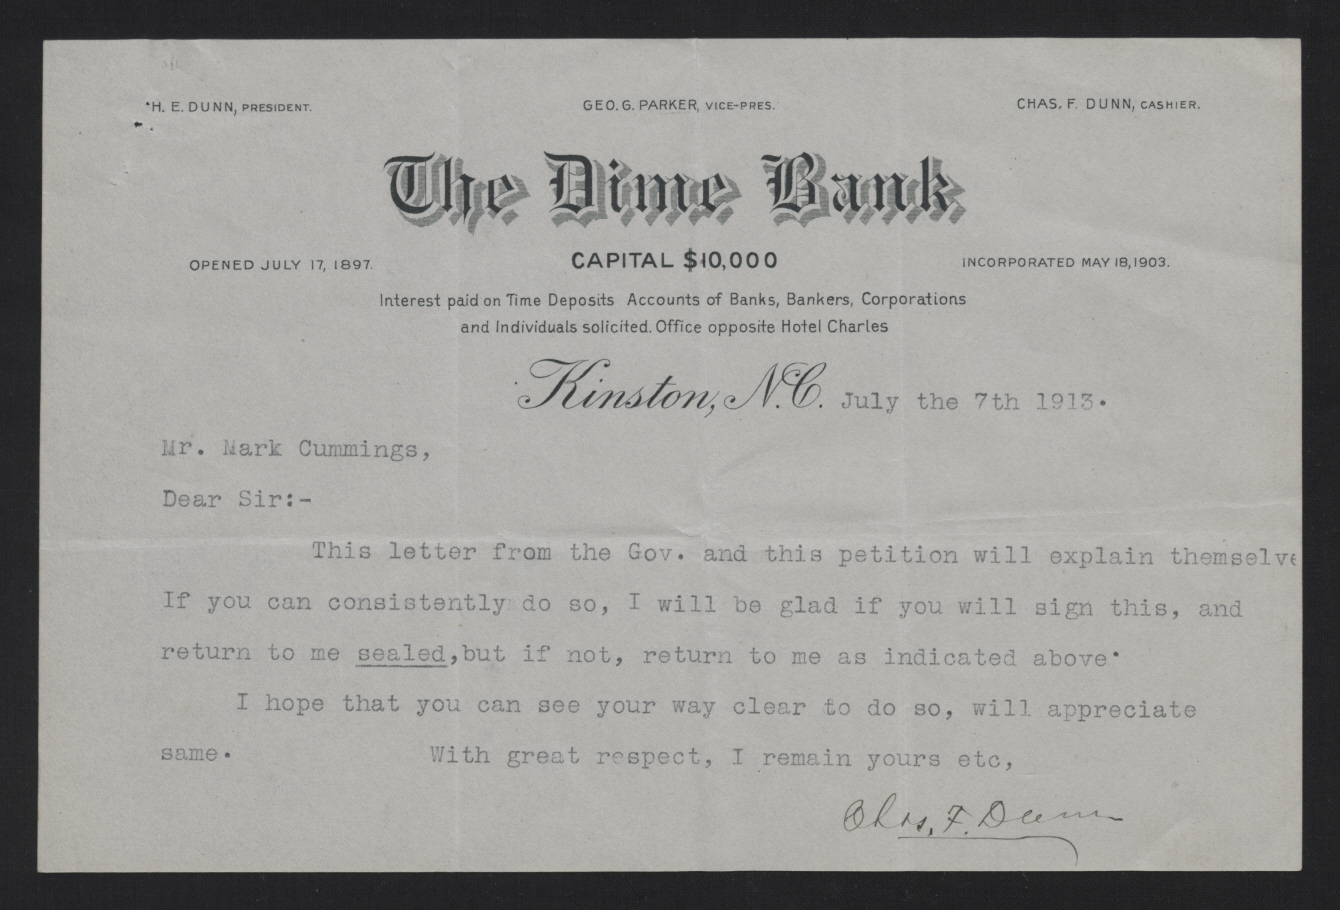 Letter from Dunn to Cummings, July 7, 1913